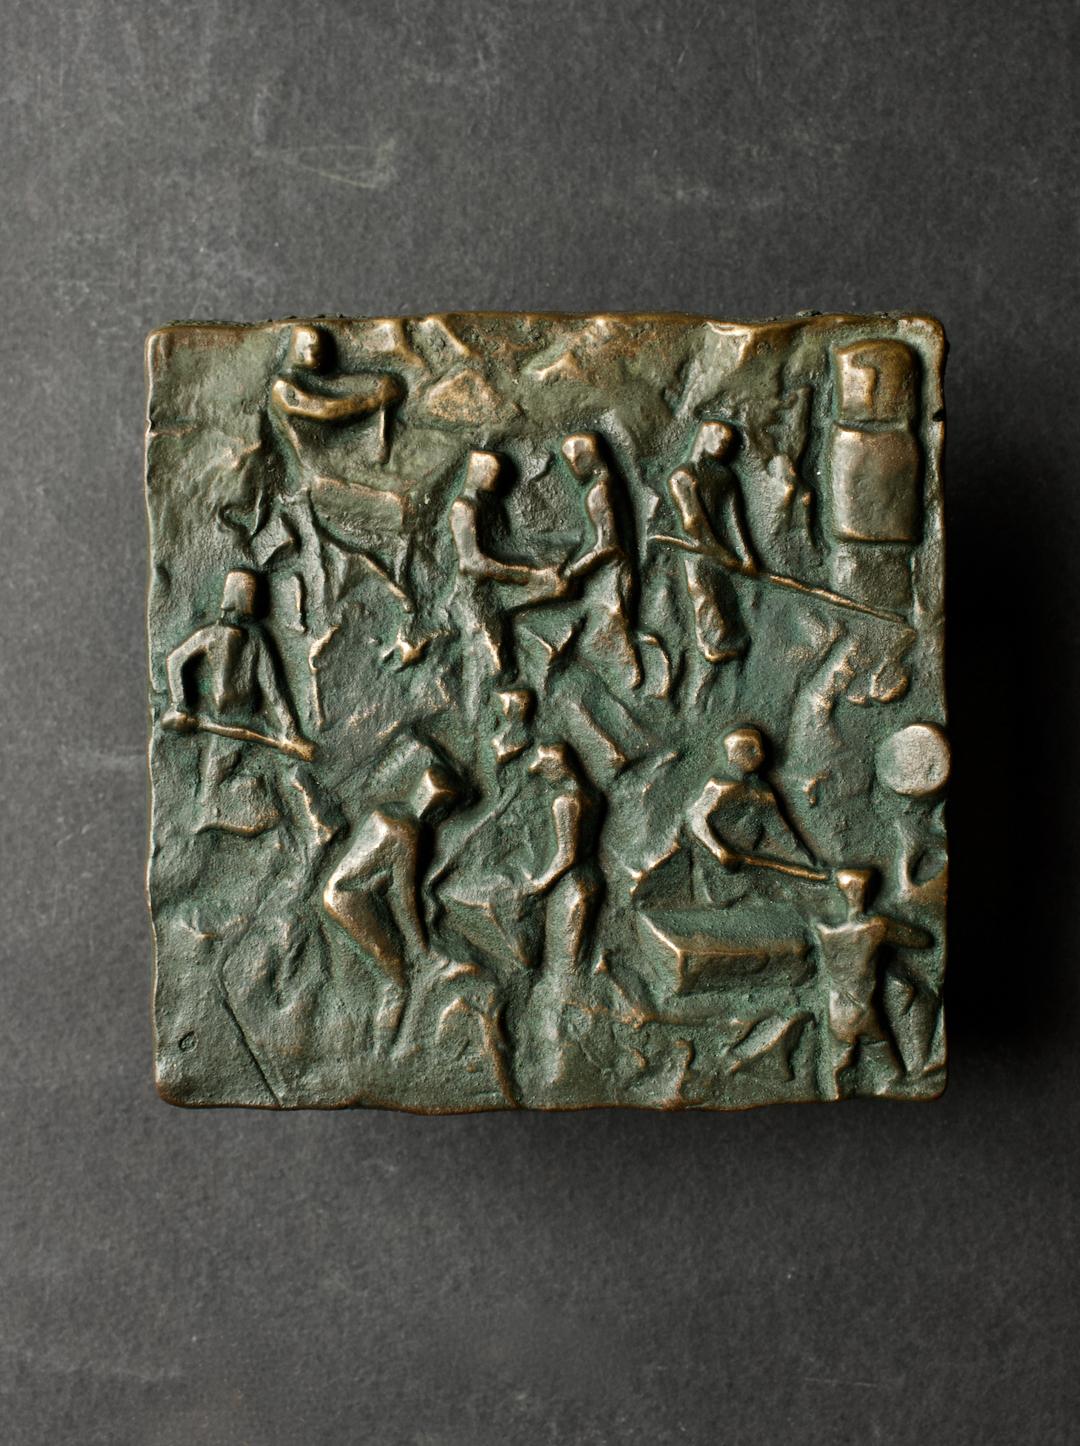 A large sculptural bronze push-pull door handle, of square form with raised semi-abstract design depicting craftsmen at work. Mid-20th century, European. 

A heavy piece, made of cast bronze with changing tones from use; we have not polished this